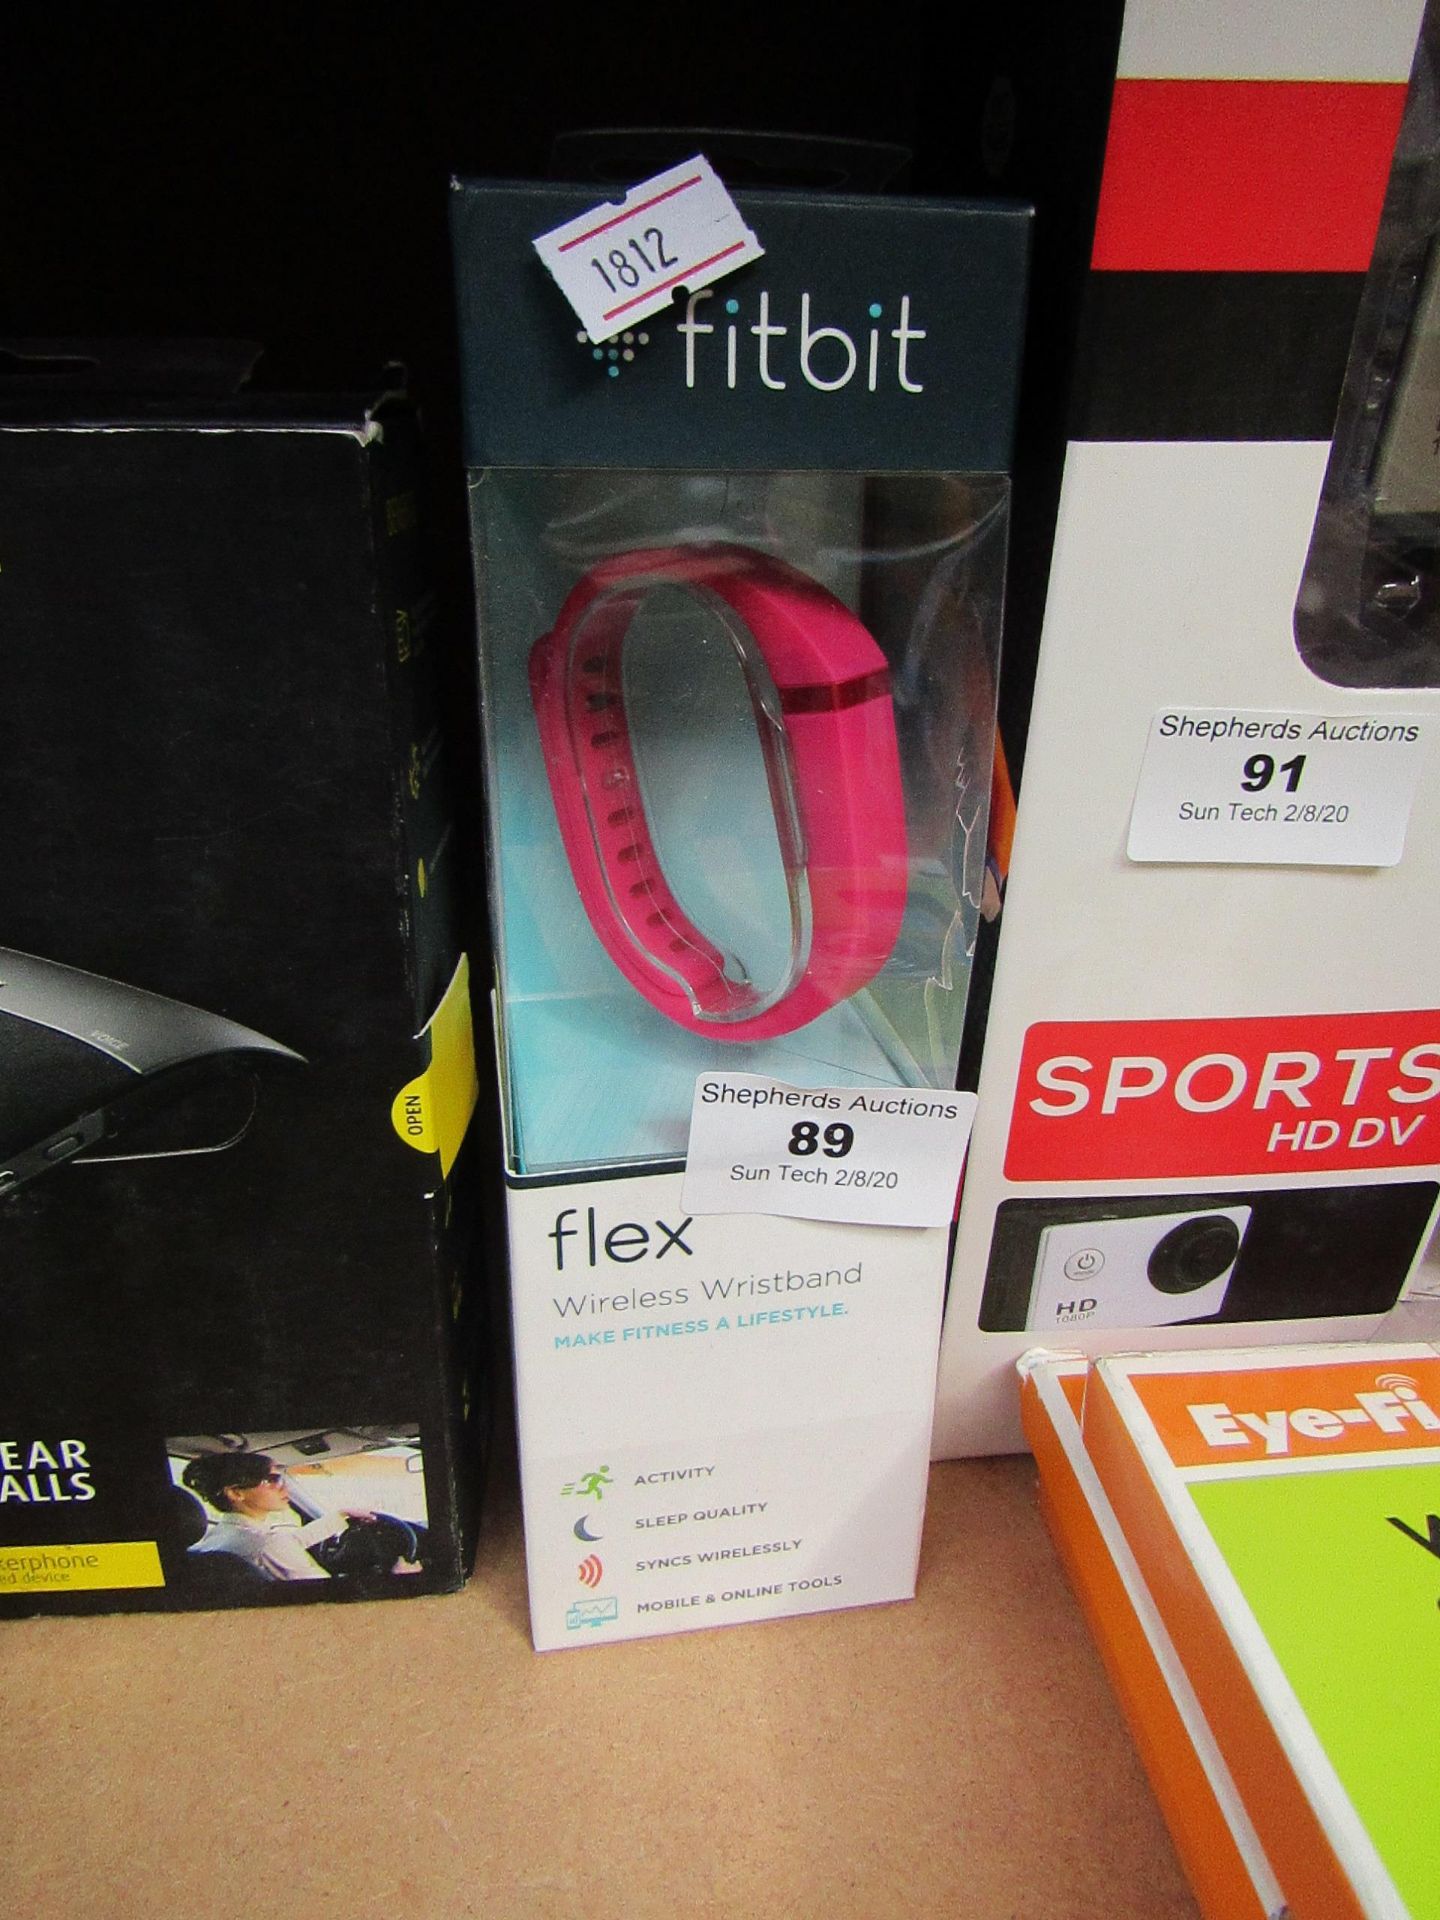 Fitbit Flex wireless fitness activity tracker wristband, untested and boxed. RRP £79.99